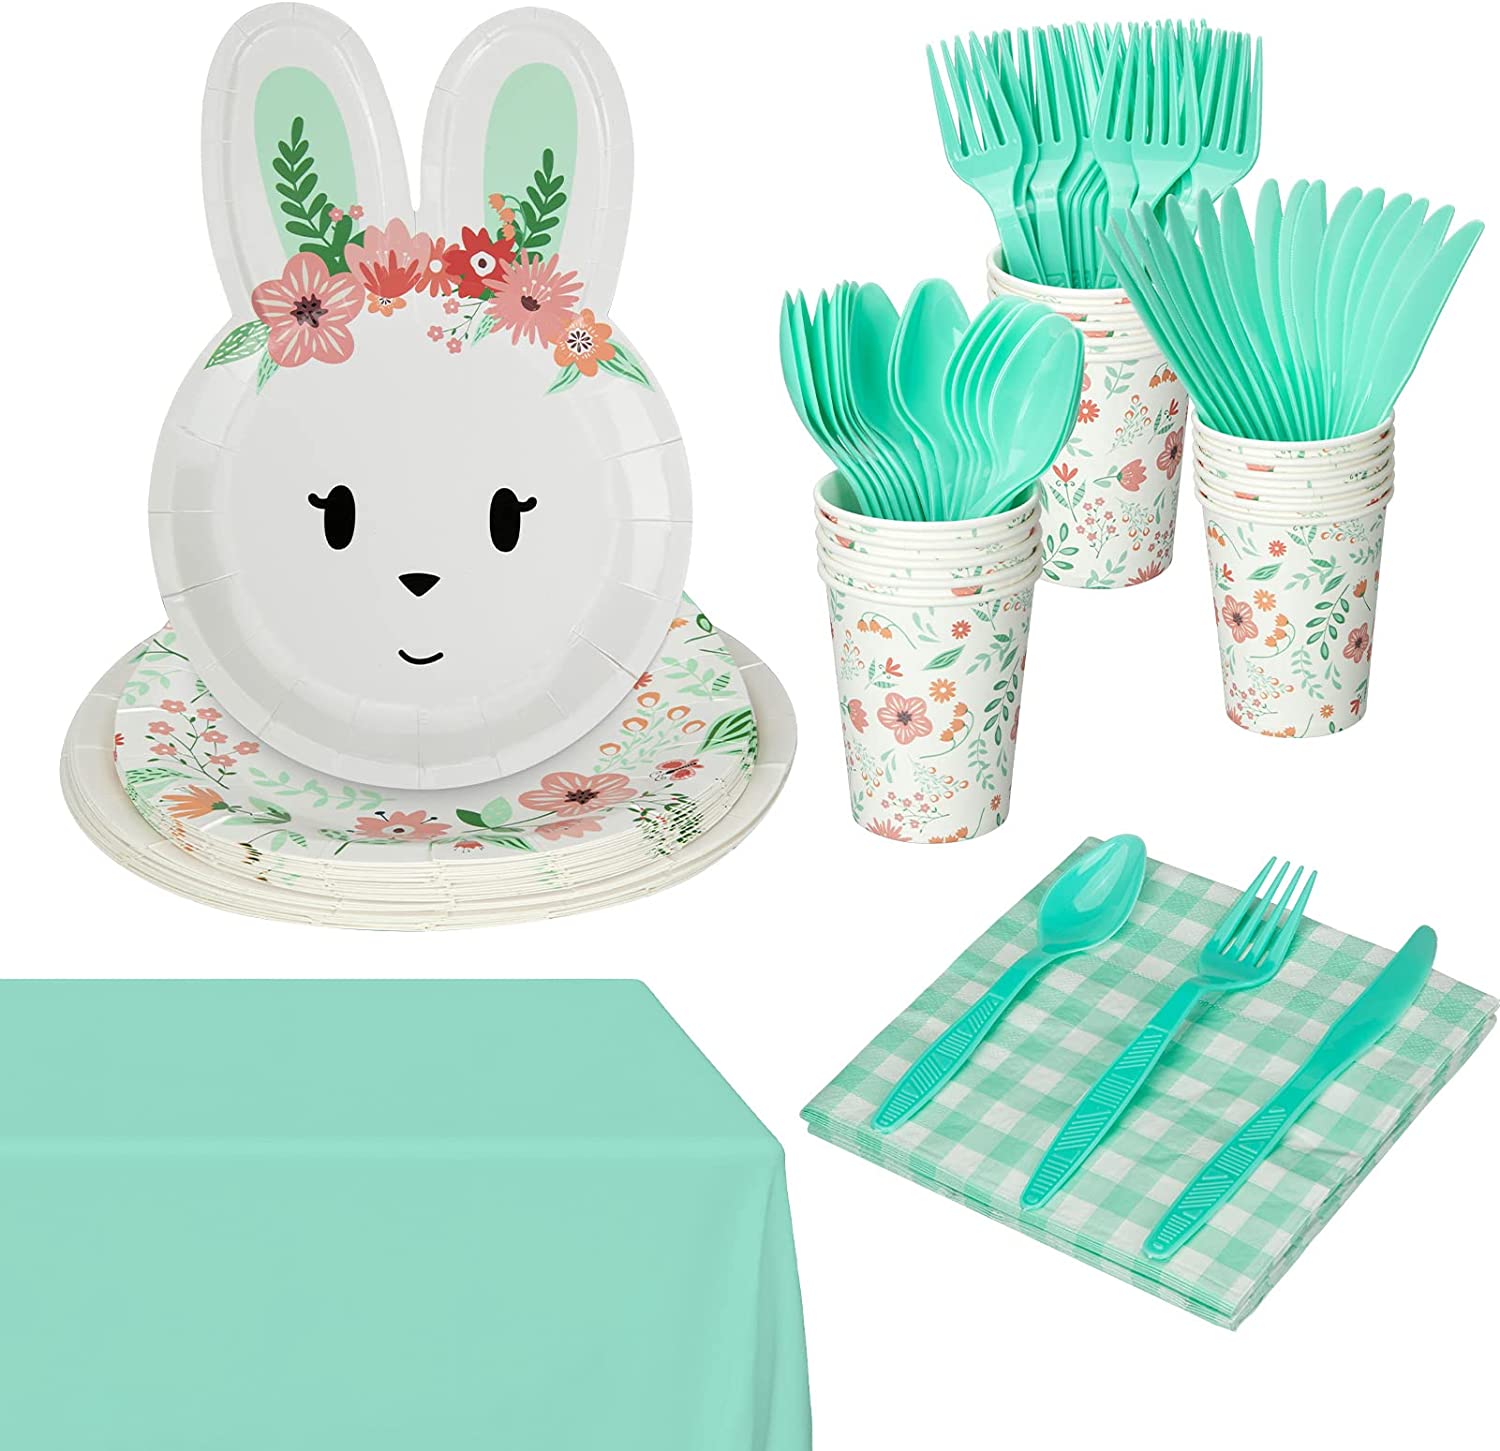 Fashionwu 117 Pcs Easter Disposable Dinnerware Set, Easter Green Decorations Paper Plates, Service for 16 Easter Party Supplies Includes Plates Cups Knives Forks Spoons Napkins Tablecloth - image 1 of 9